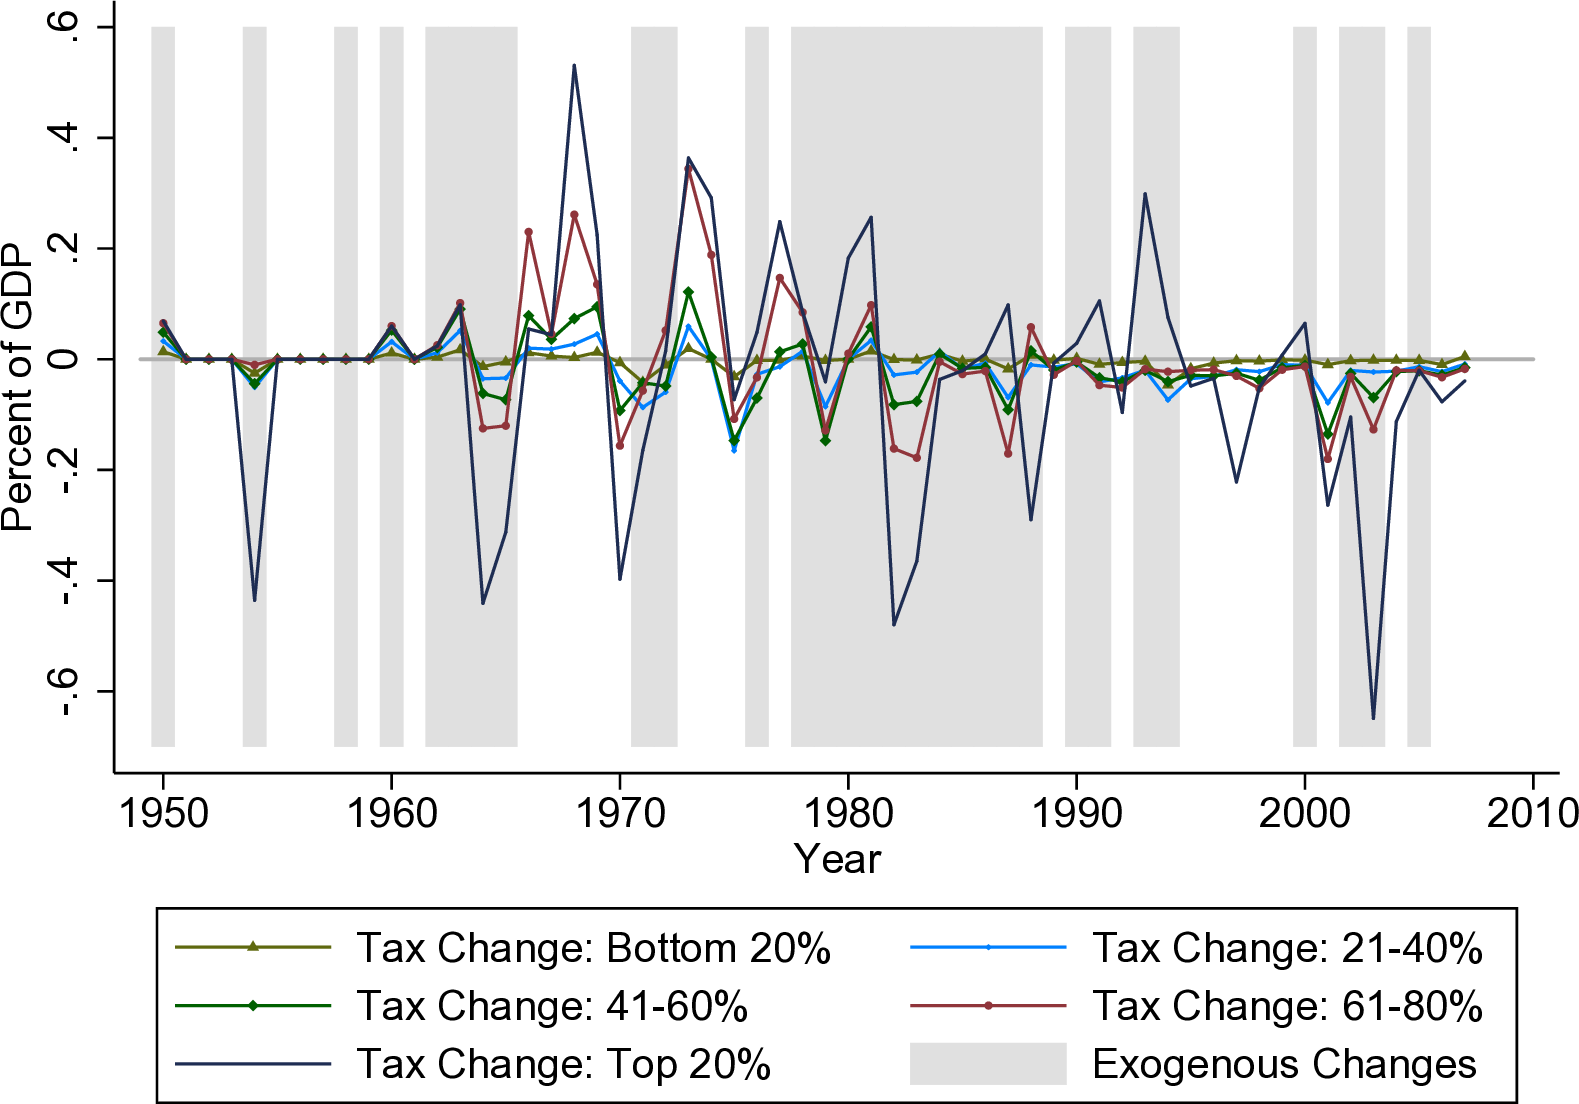 Federal Income and Payroll Tax Changes by AGI Quintile. Source: Zidar (2018).